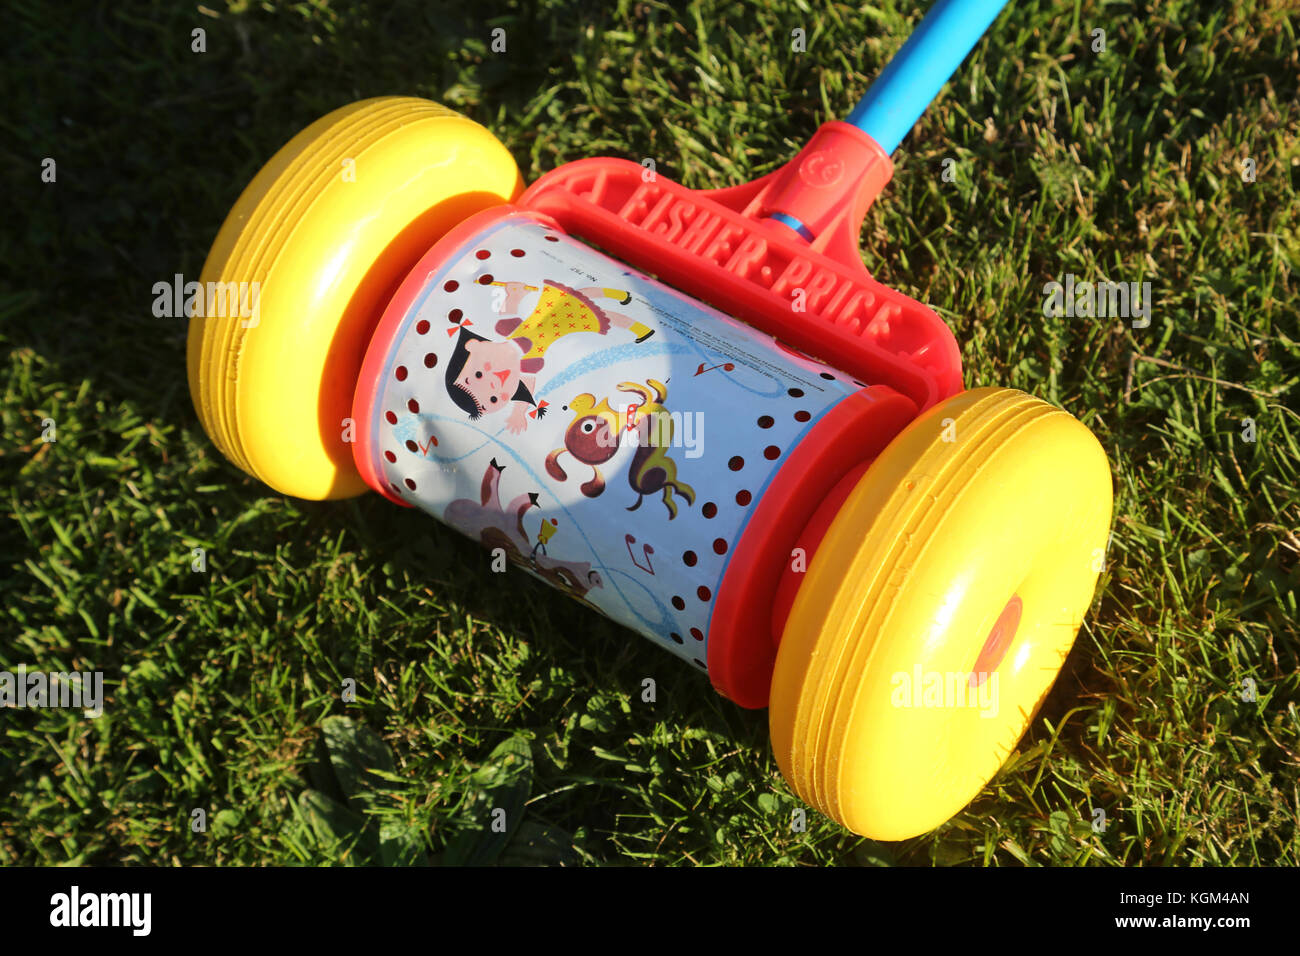 Vintage Fisher Price Push Along Musical Toy Stock Photo - Alamy